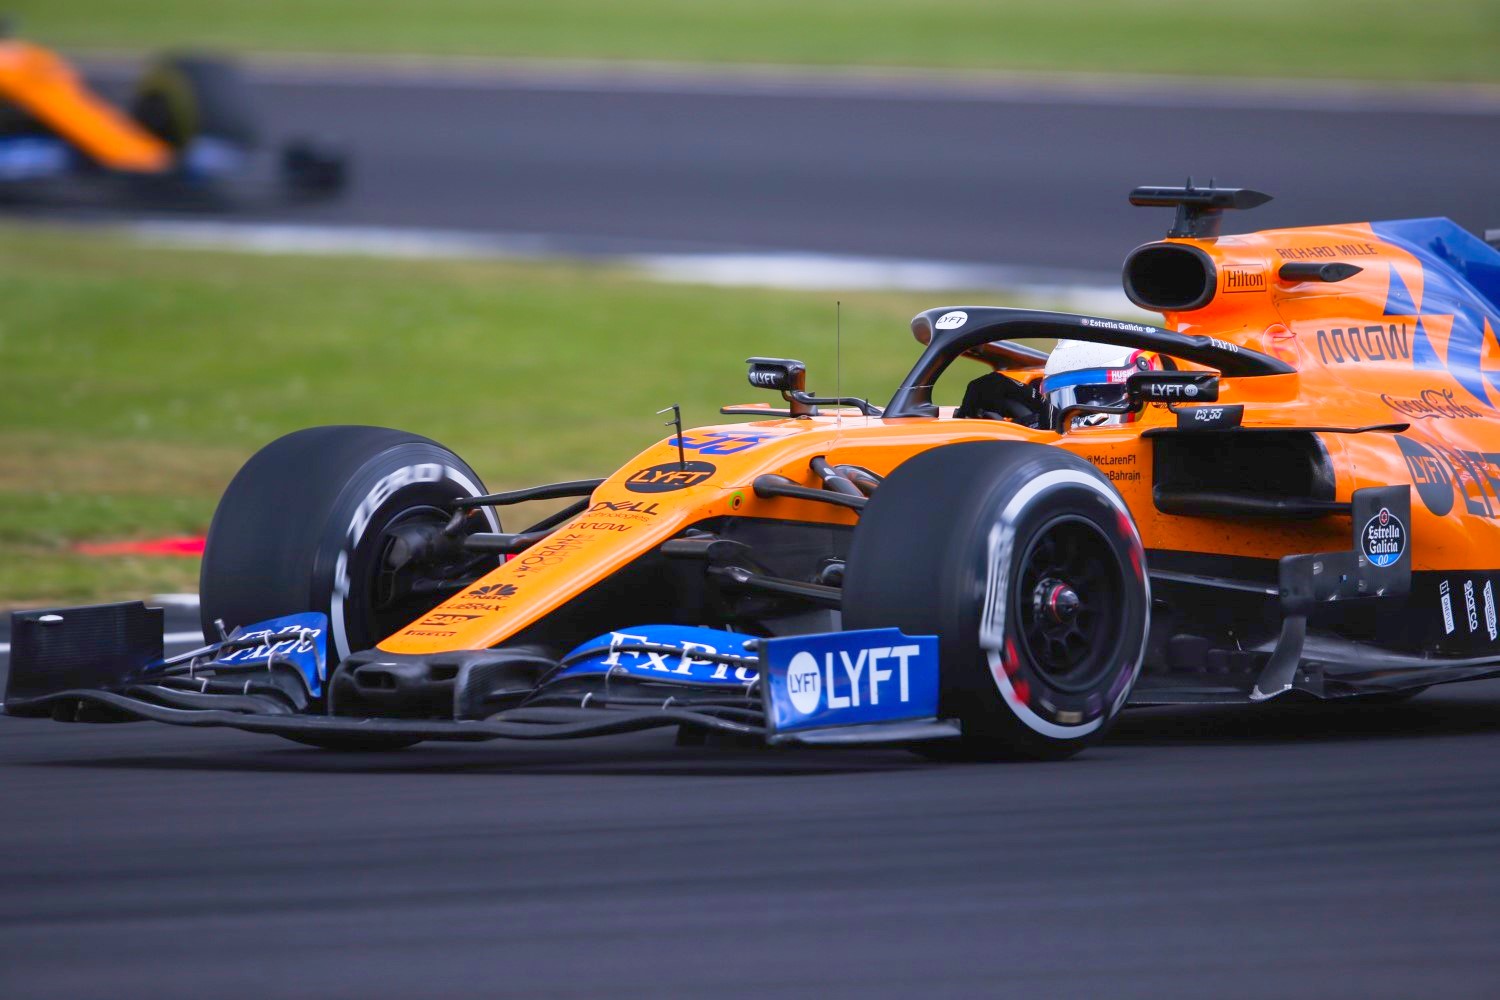 McLaren used to blame Honda, now they blame Renault